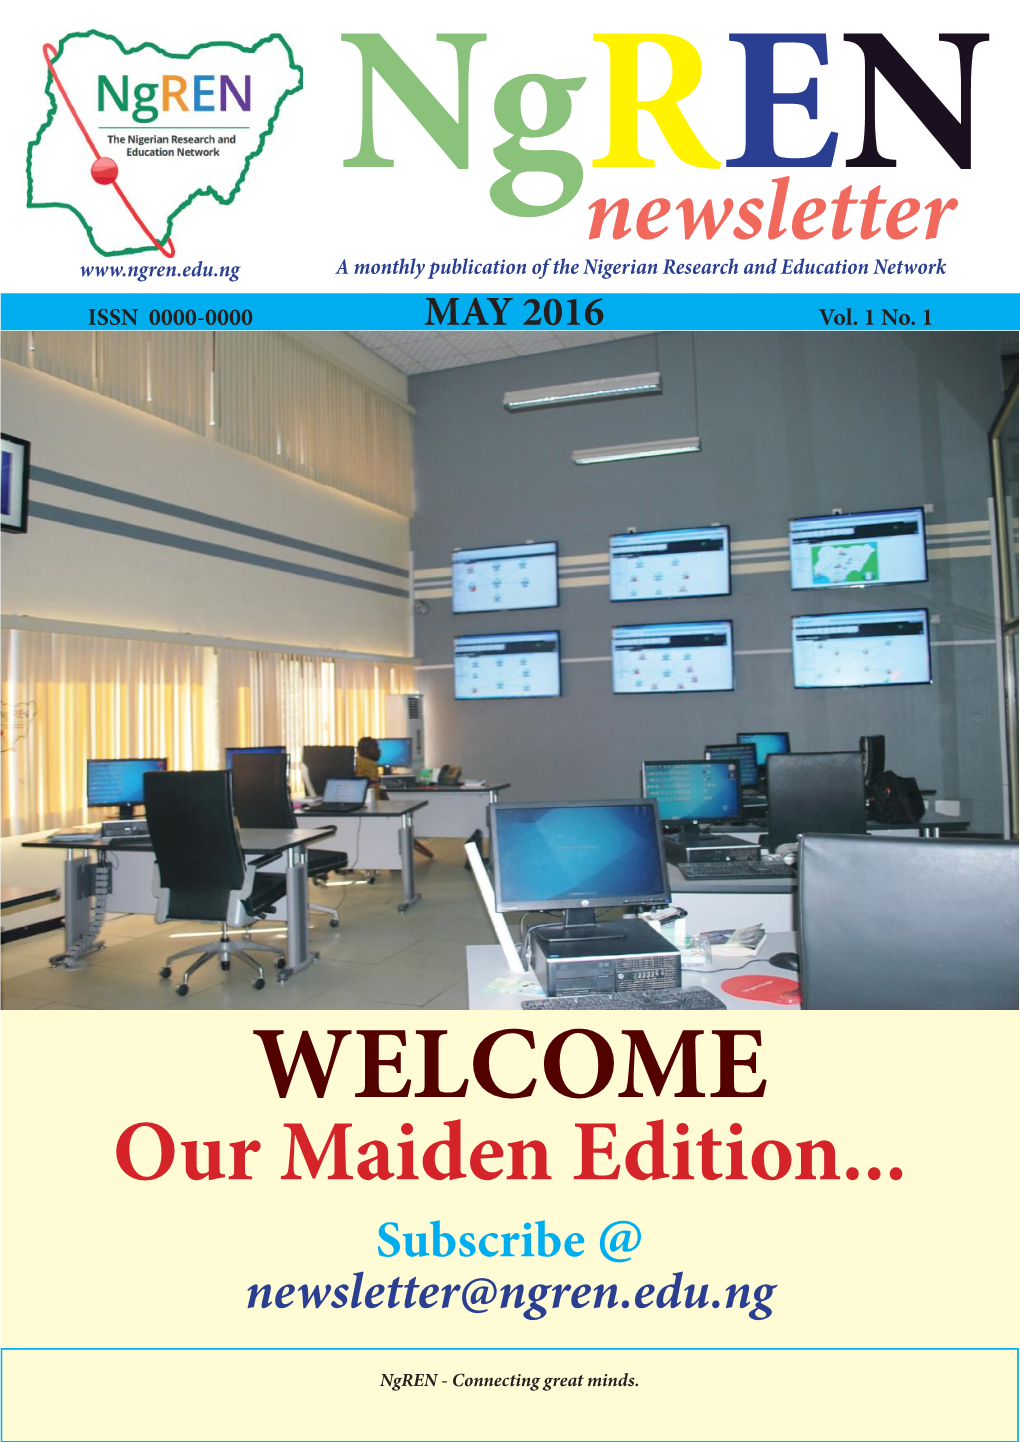 WELCOME Our Maiden Edition